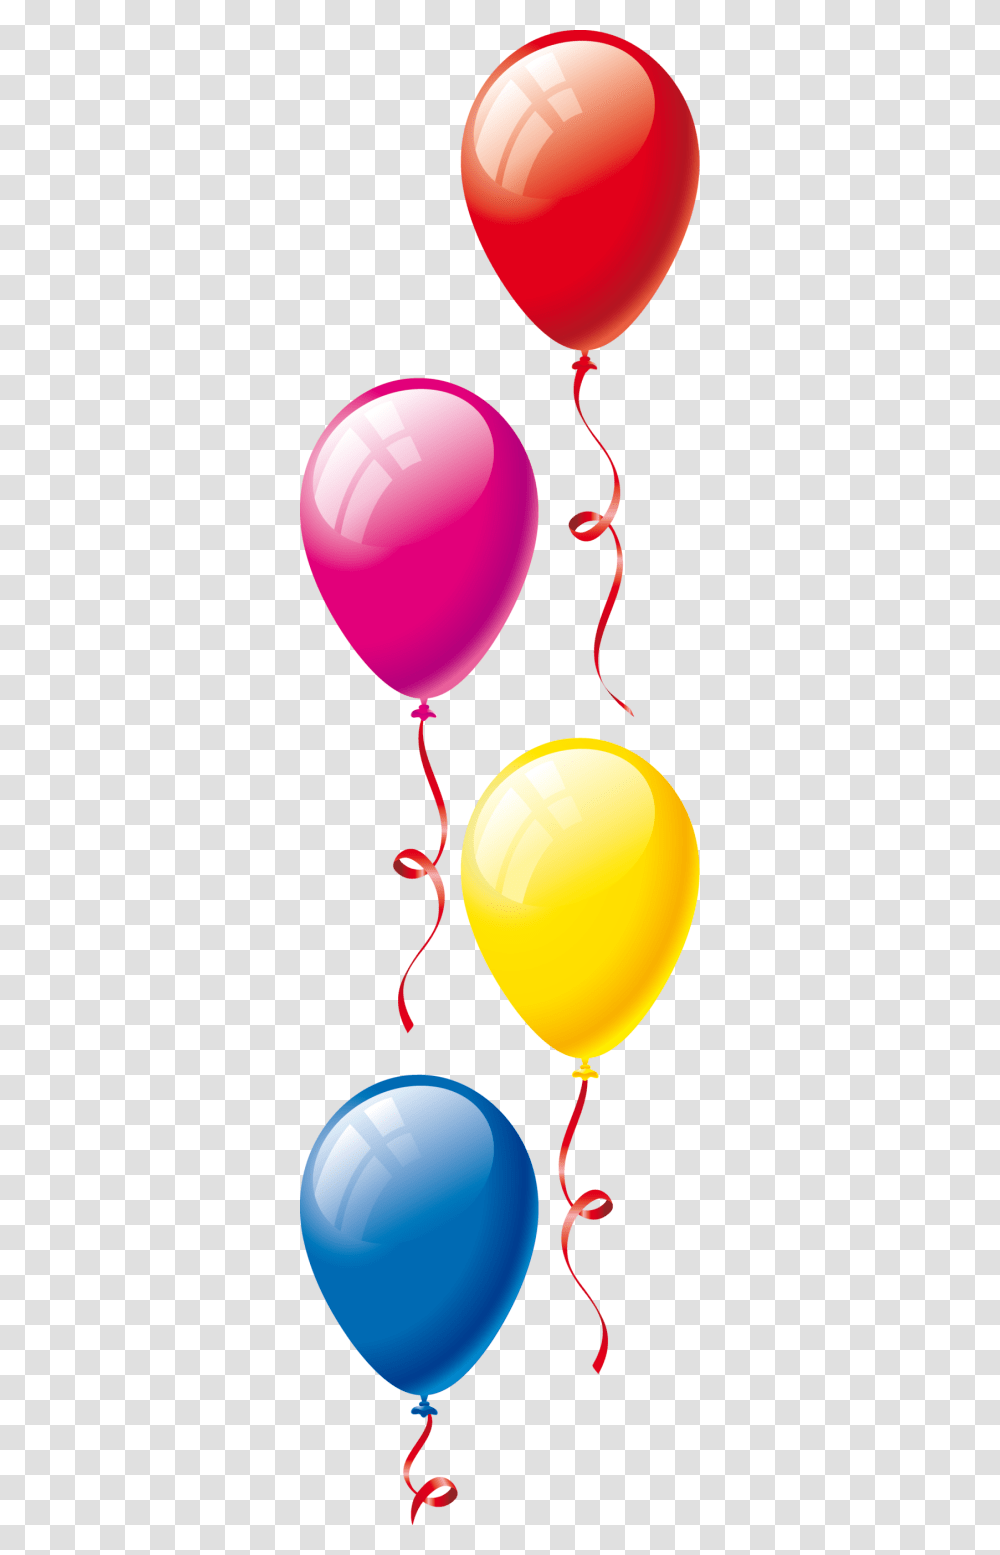 Party Balloon Toy Ballons Birthday Free Hq Clipart Balloons Transparent Png